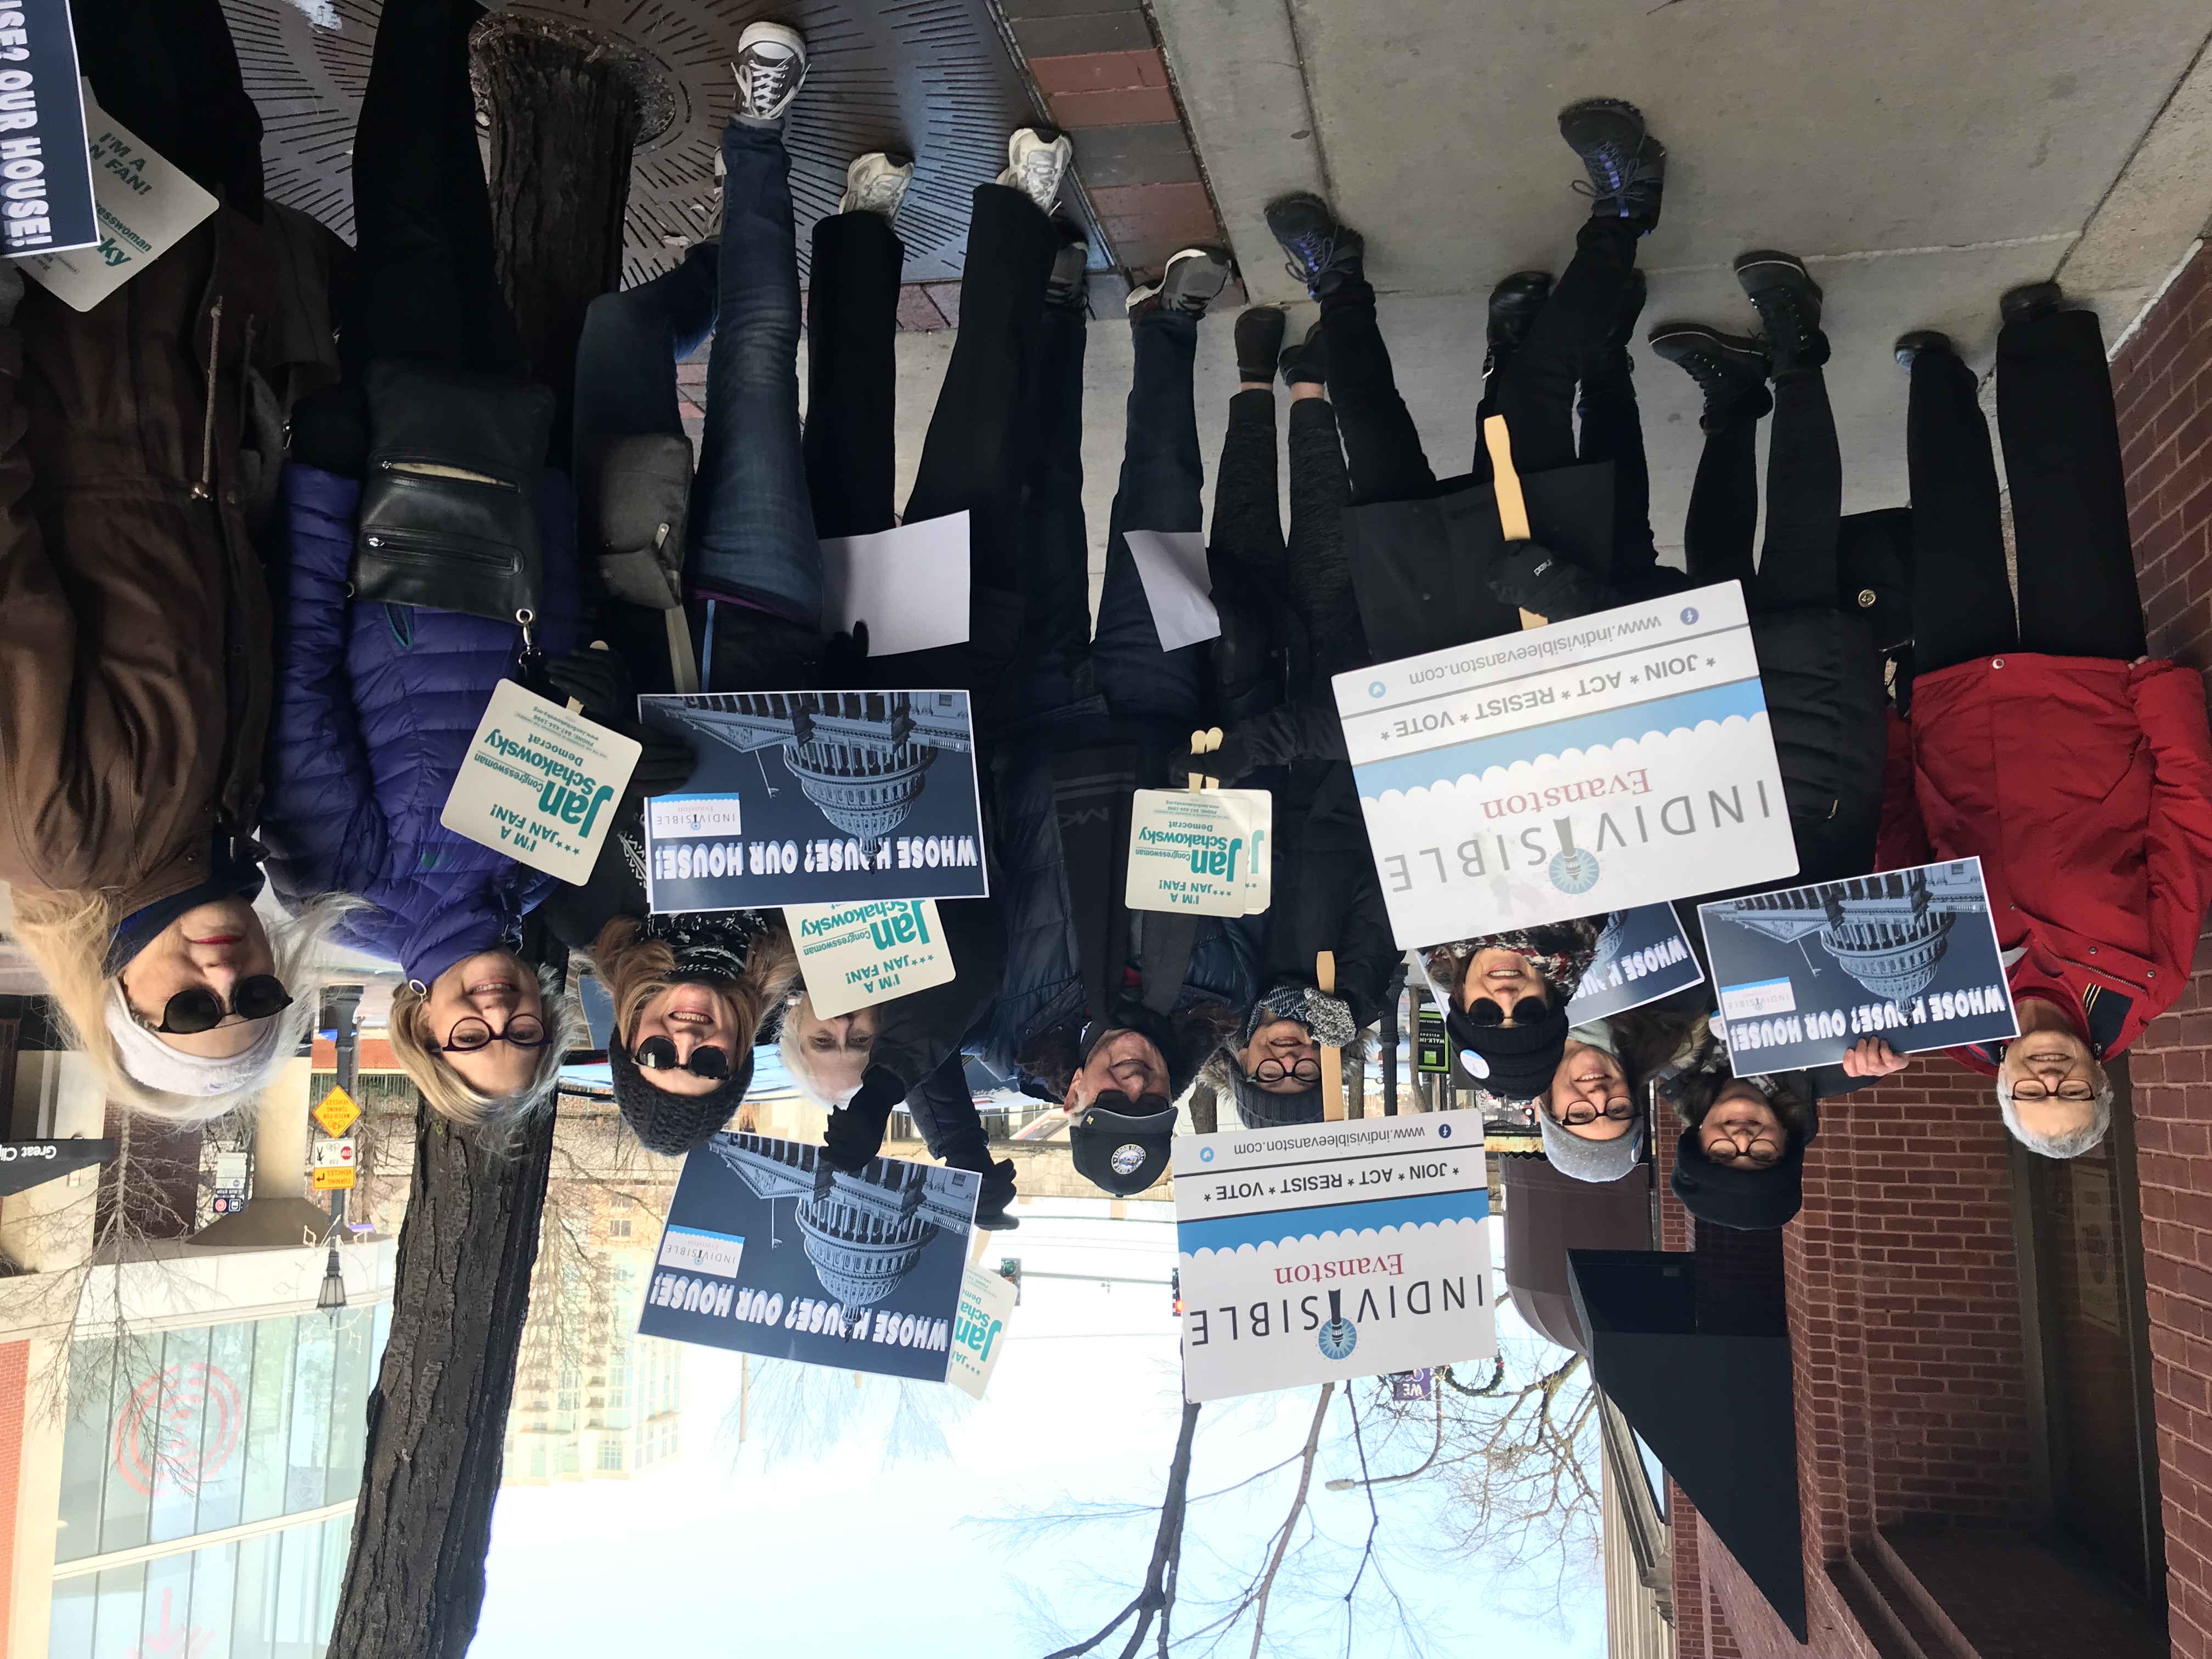 Local Indivisible Evanston group